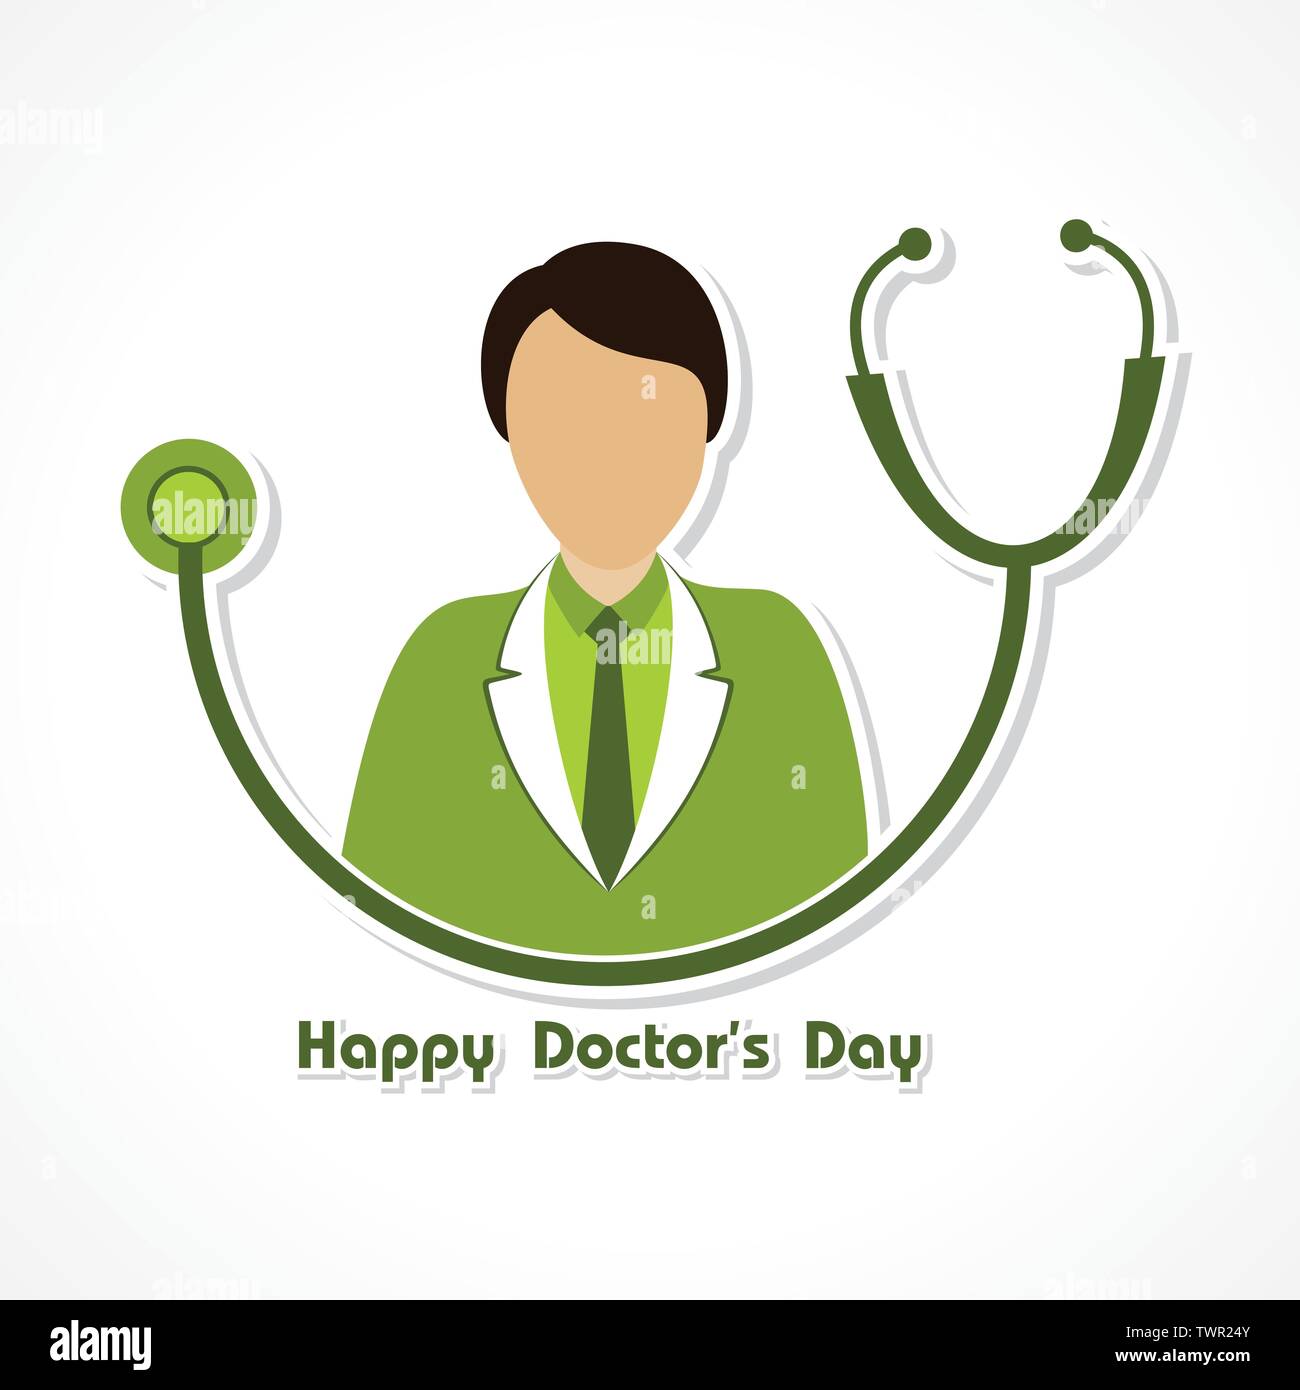 Illustration of Happy Doctors Day- 1 july stock Vector Stock ...